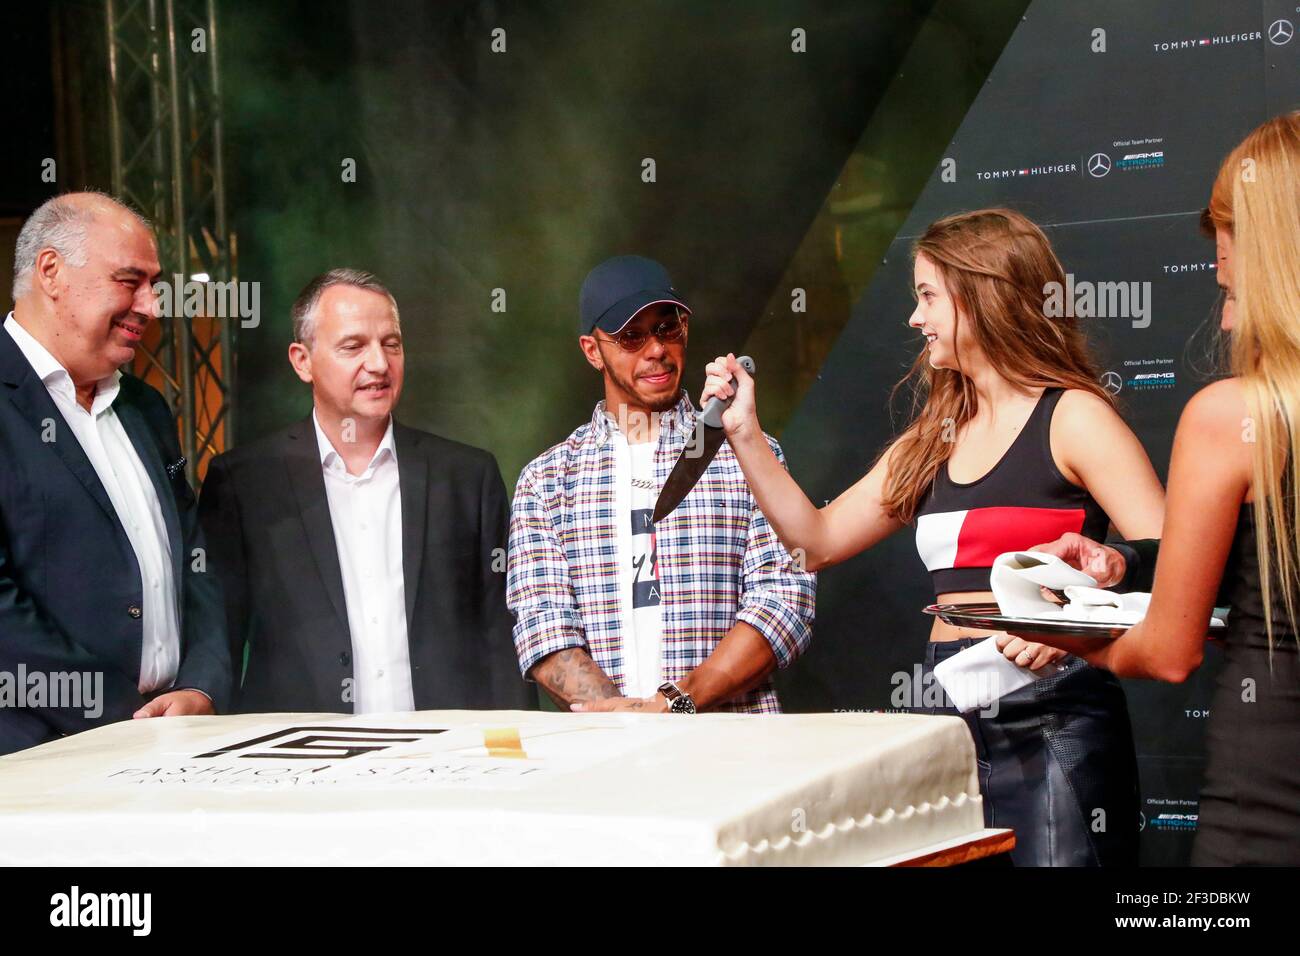 HAMILTON Lewis (gbr), Mercedes AMG F1 Petronas GP W09 Hybrid EQ Power+,  with PALVIN Barbara, model, at the Tommy Hilfiger party during the 2018  Formula One World Championship, Grand Prix of Hungary